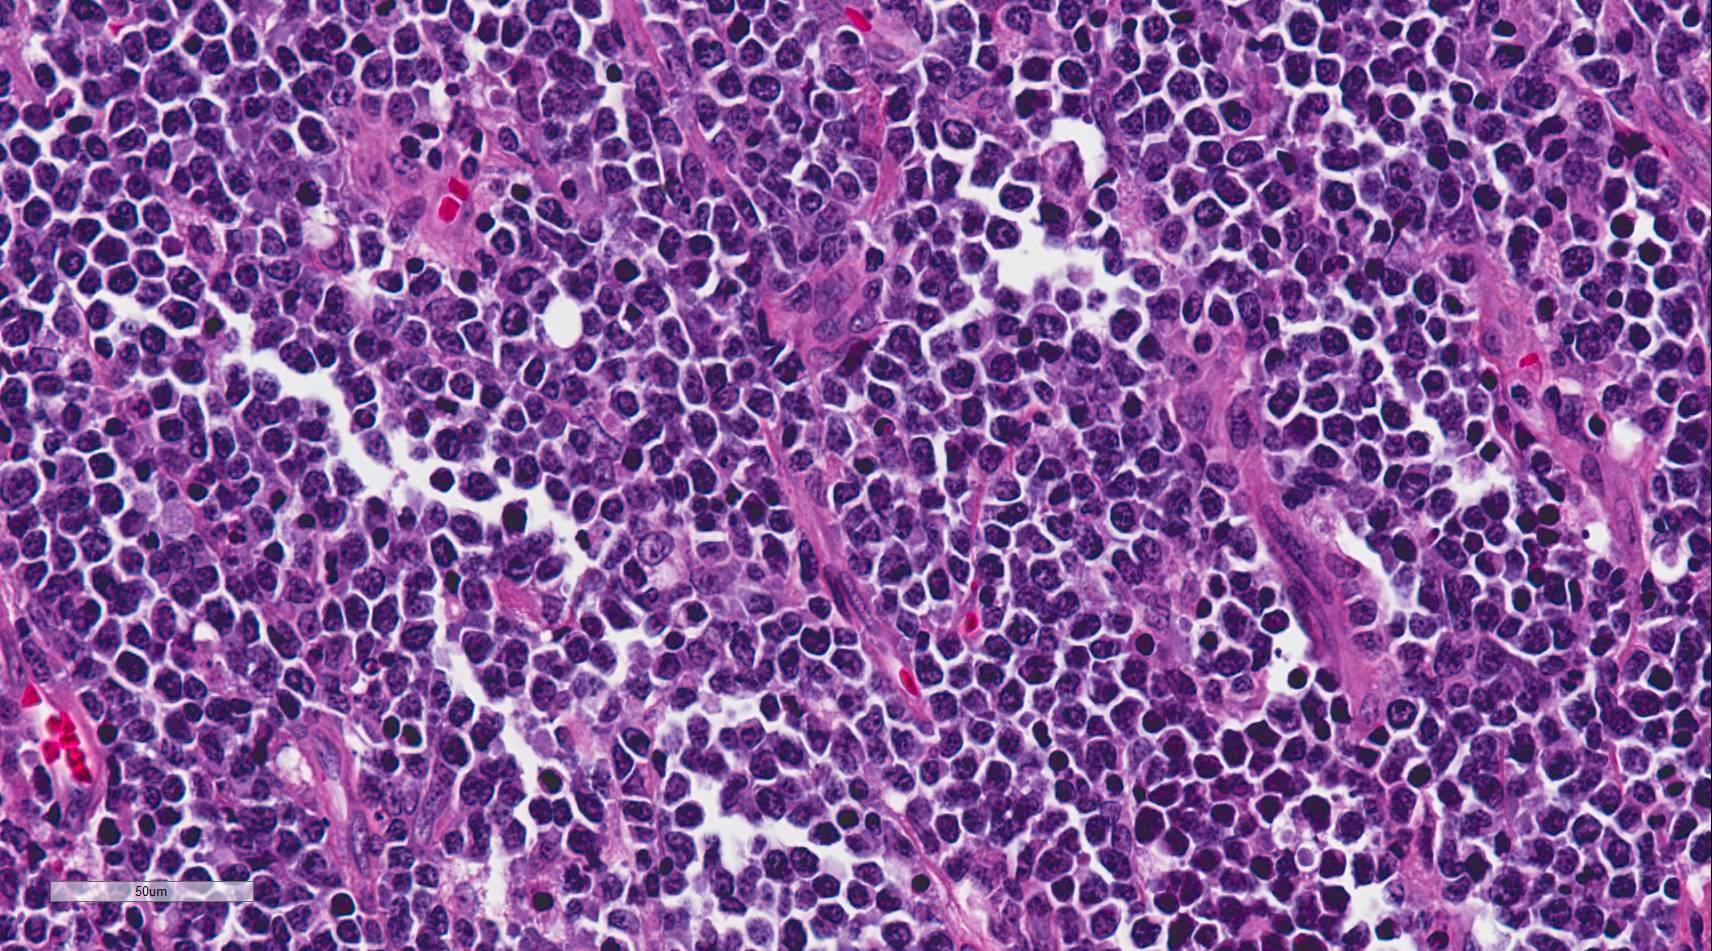 Sheets of intermediate sized lymphocytes in a case of Burkitt lymphoma involving the ileum (400x magnification).